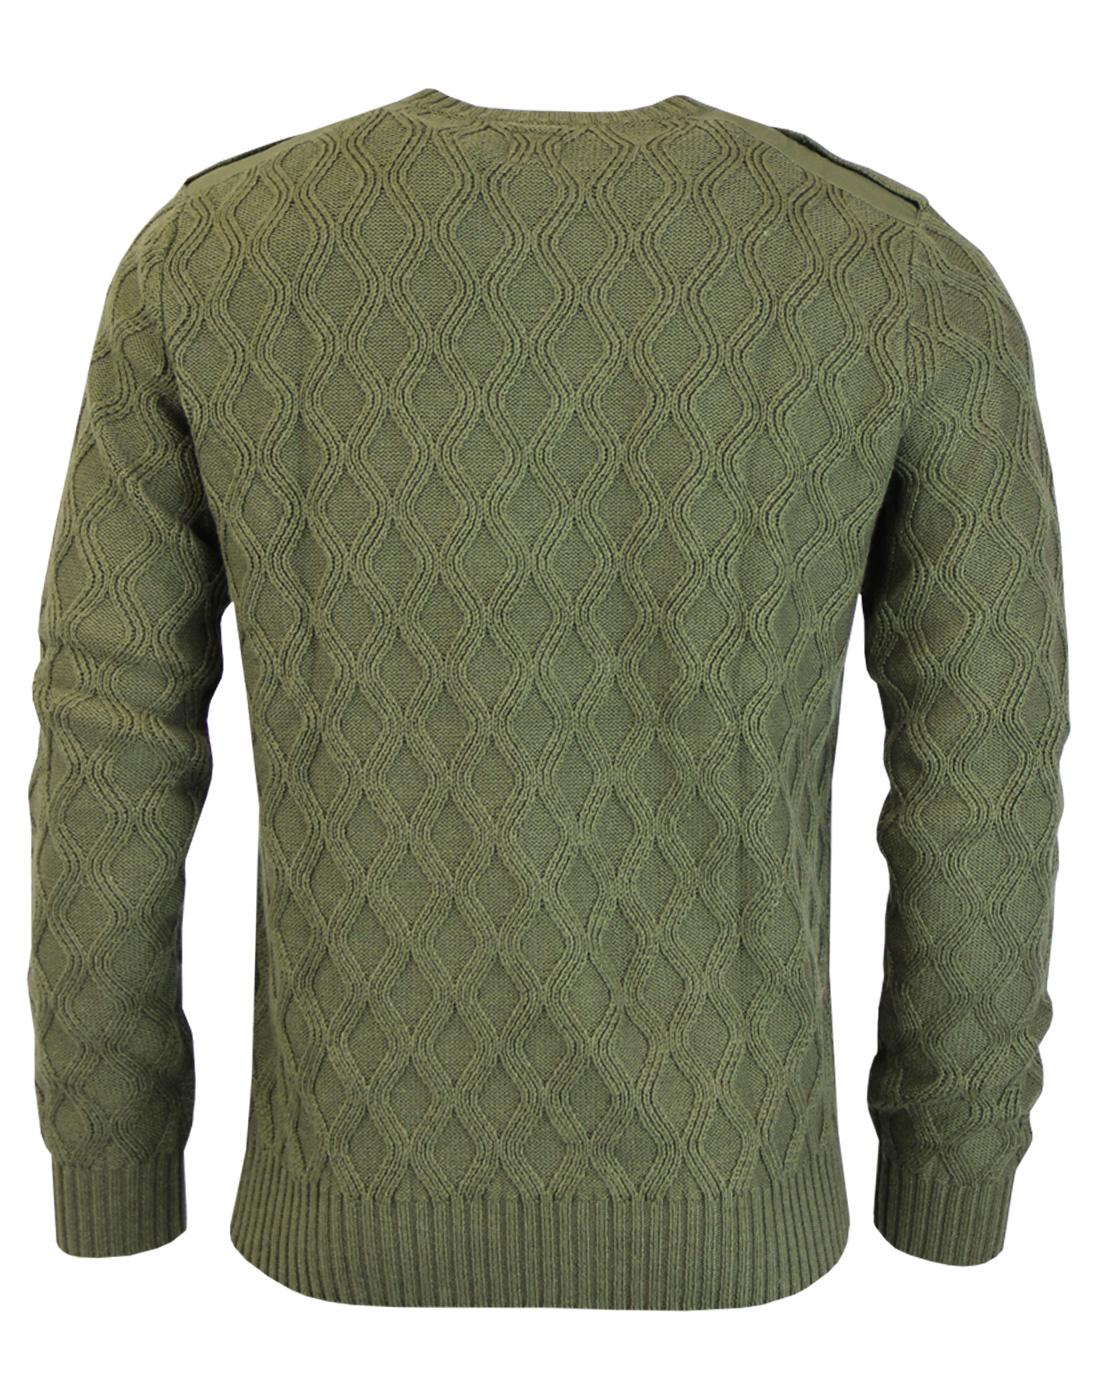 PRETTY GREEN Hertford 60s Mod Cable Knit Army Jumper in Khaki